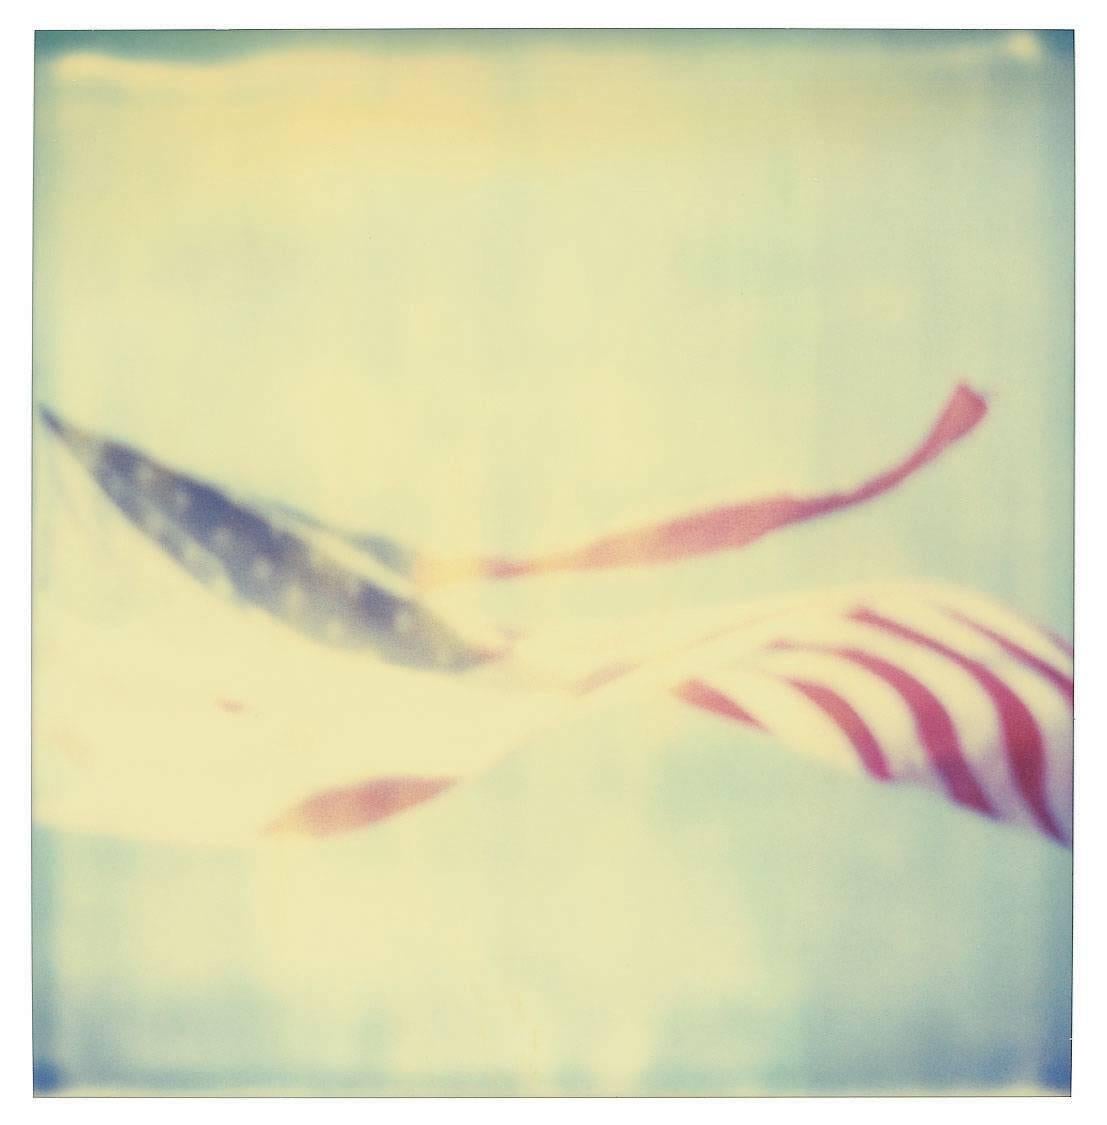 Primary Colors - Contemporary, Figurative, Icons, Polaroid, Photograph, expired 5